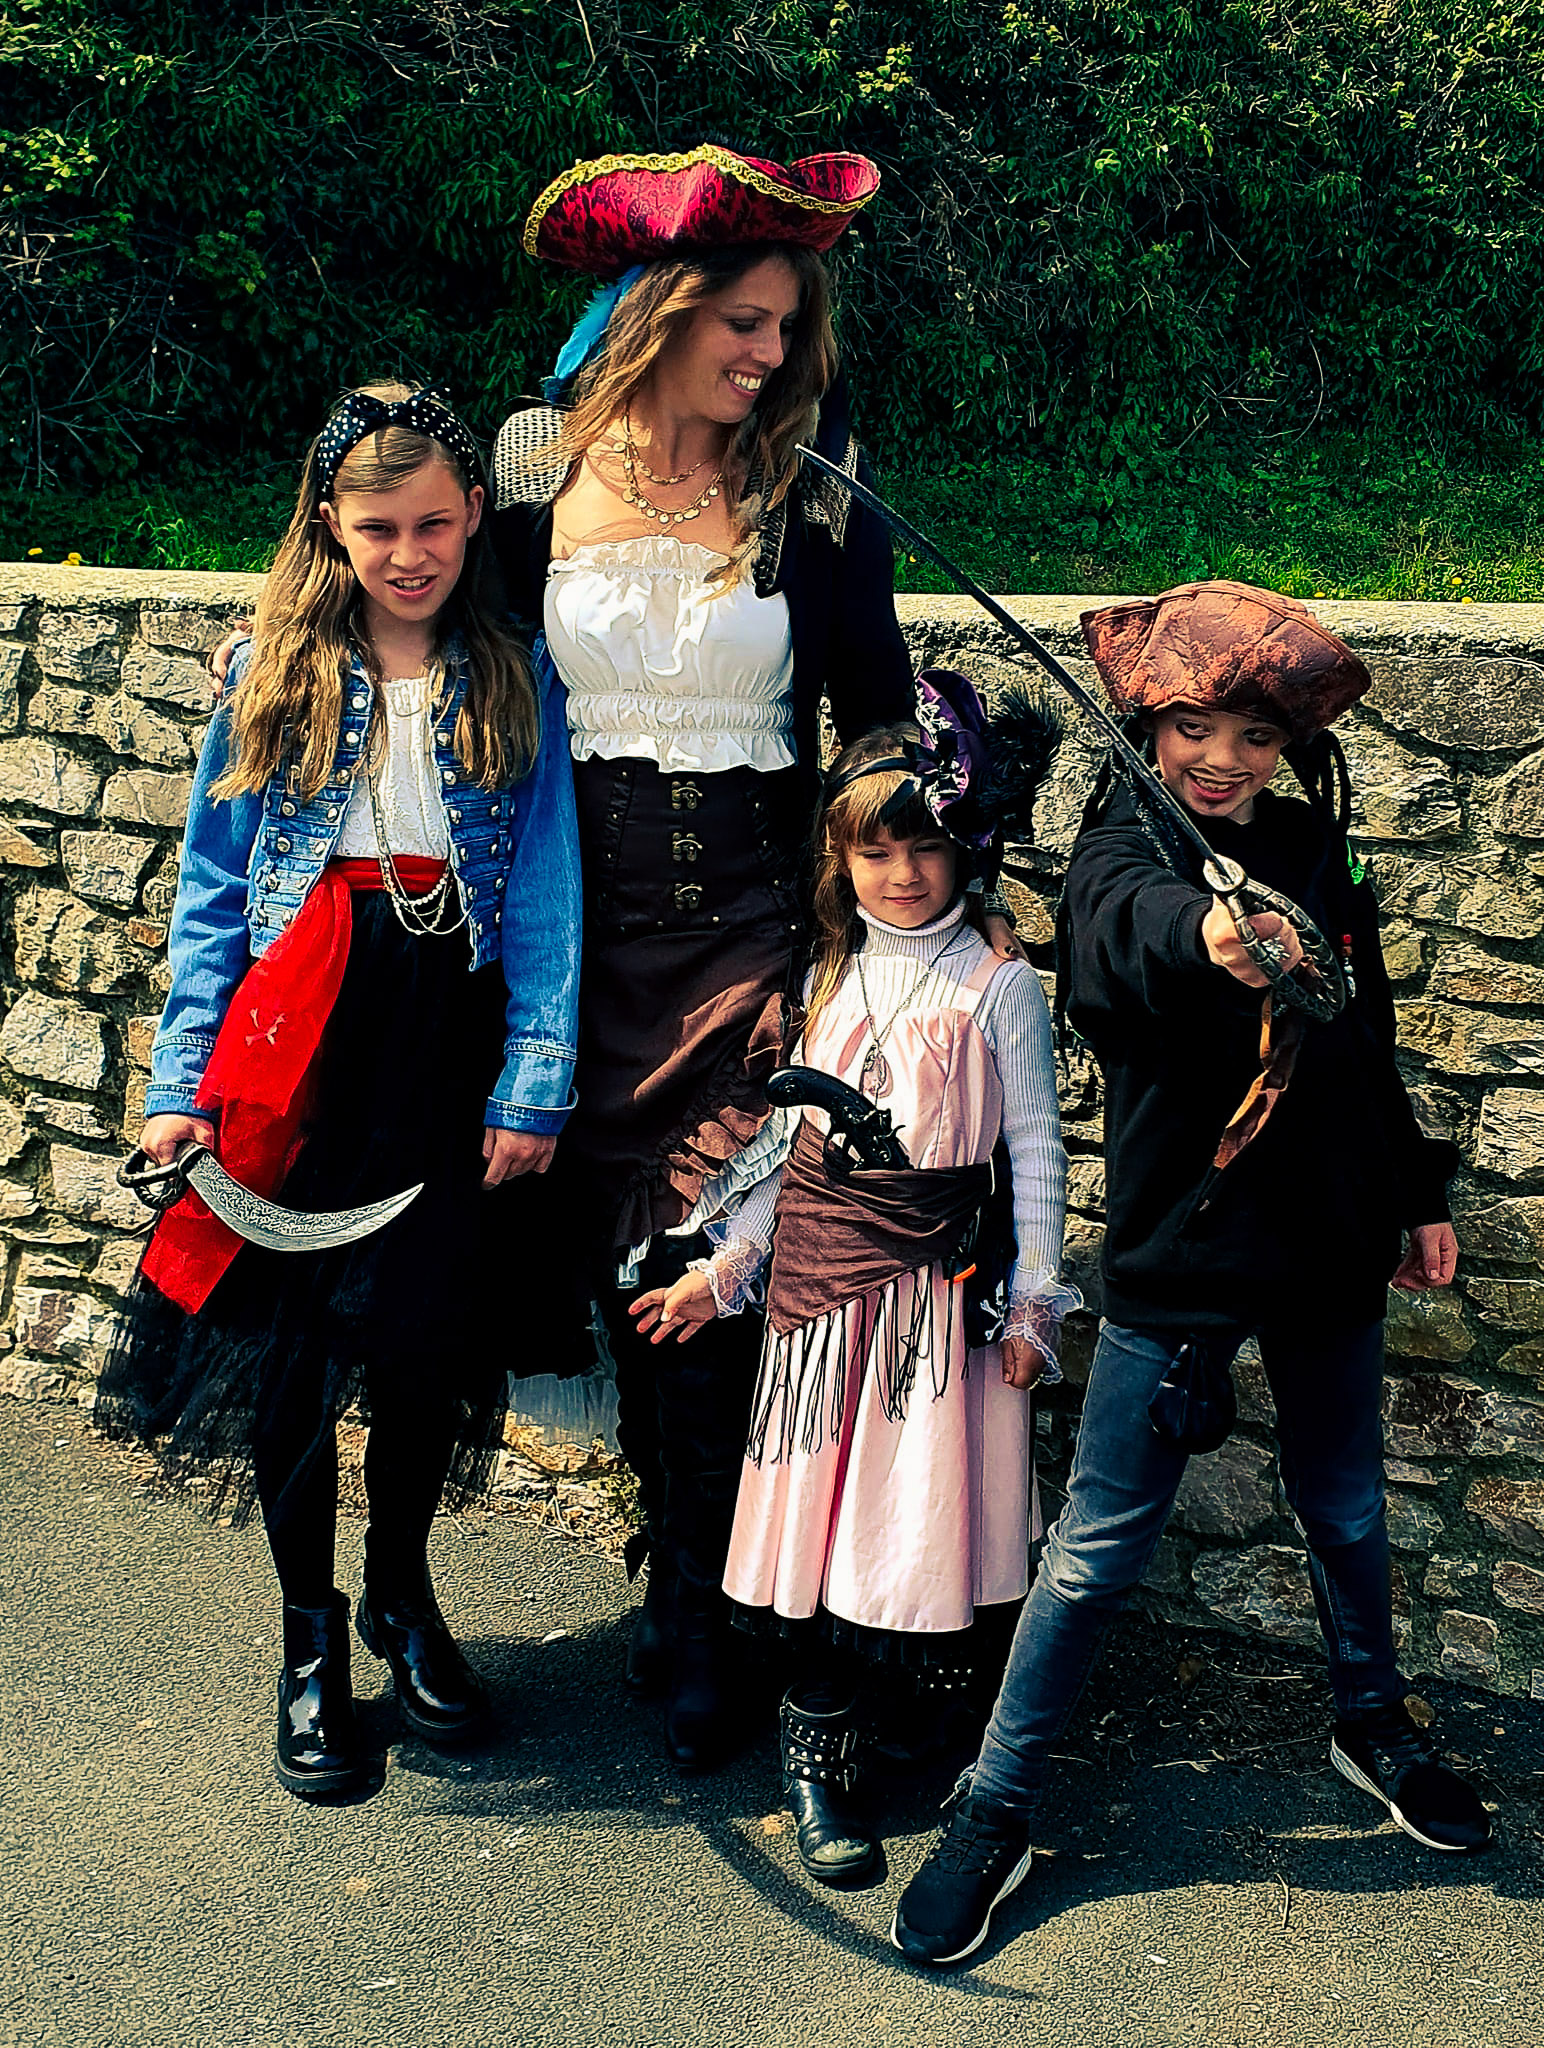 Family at the Brixham Pirate Festival